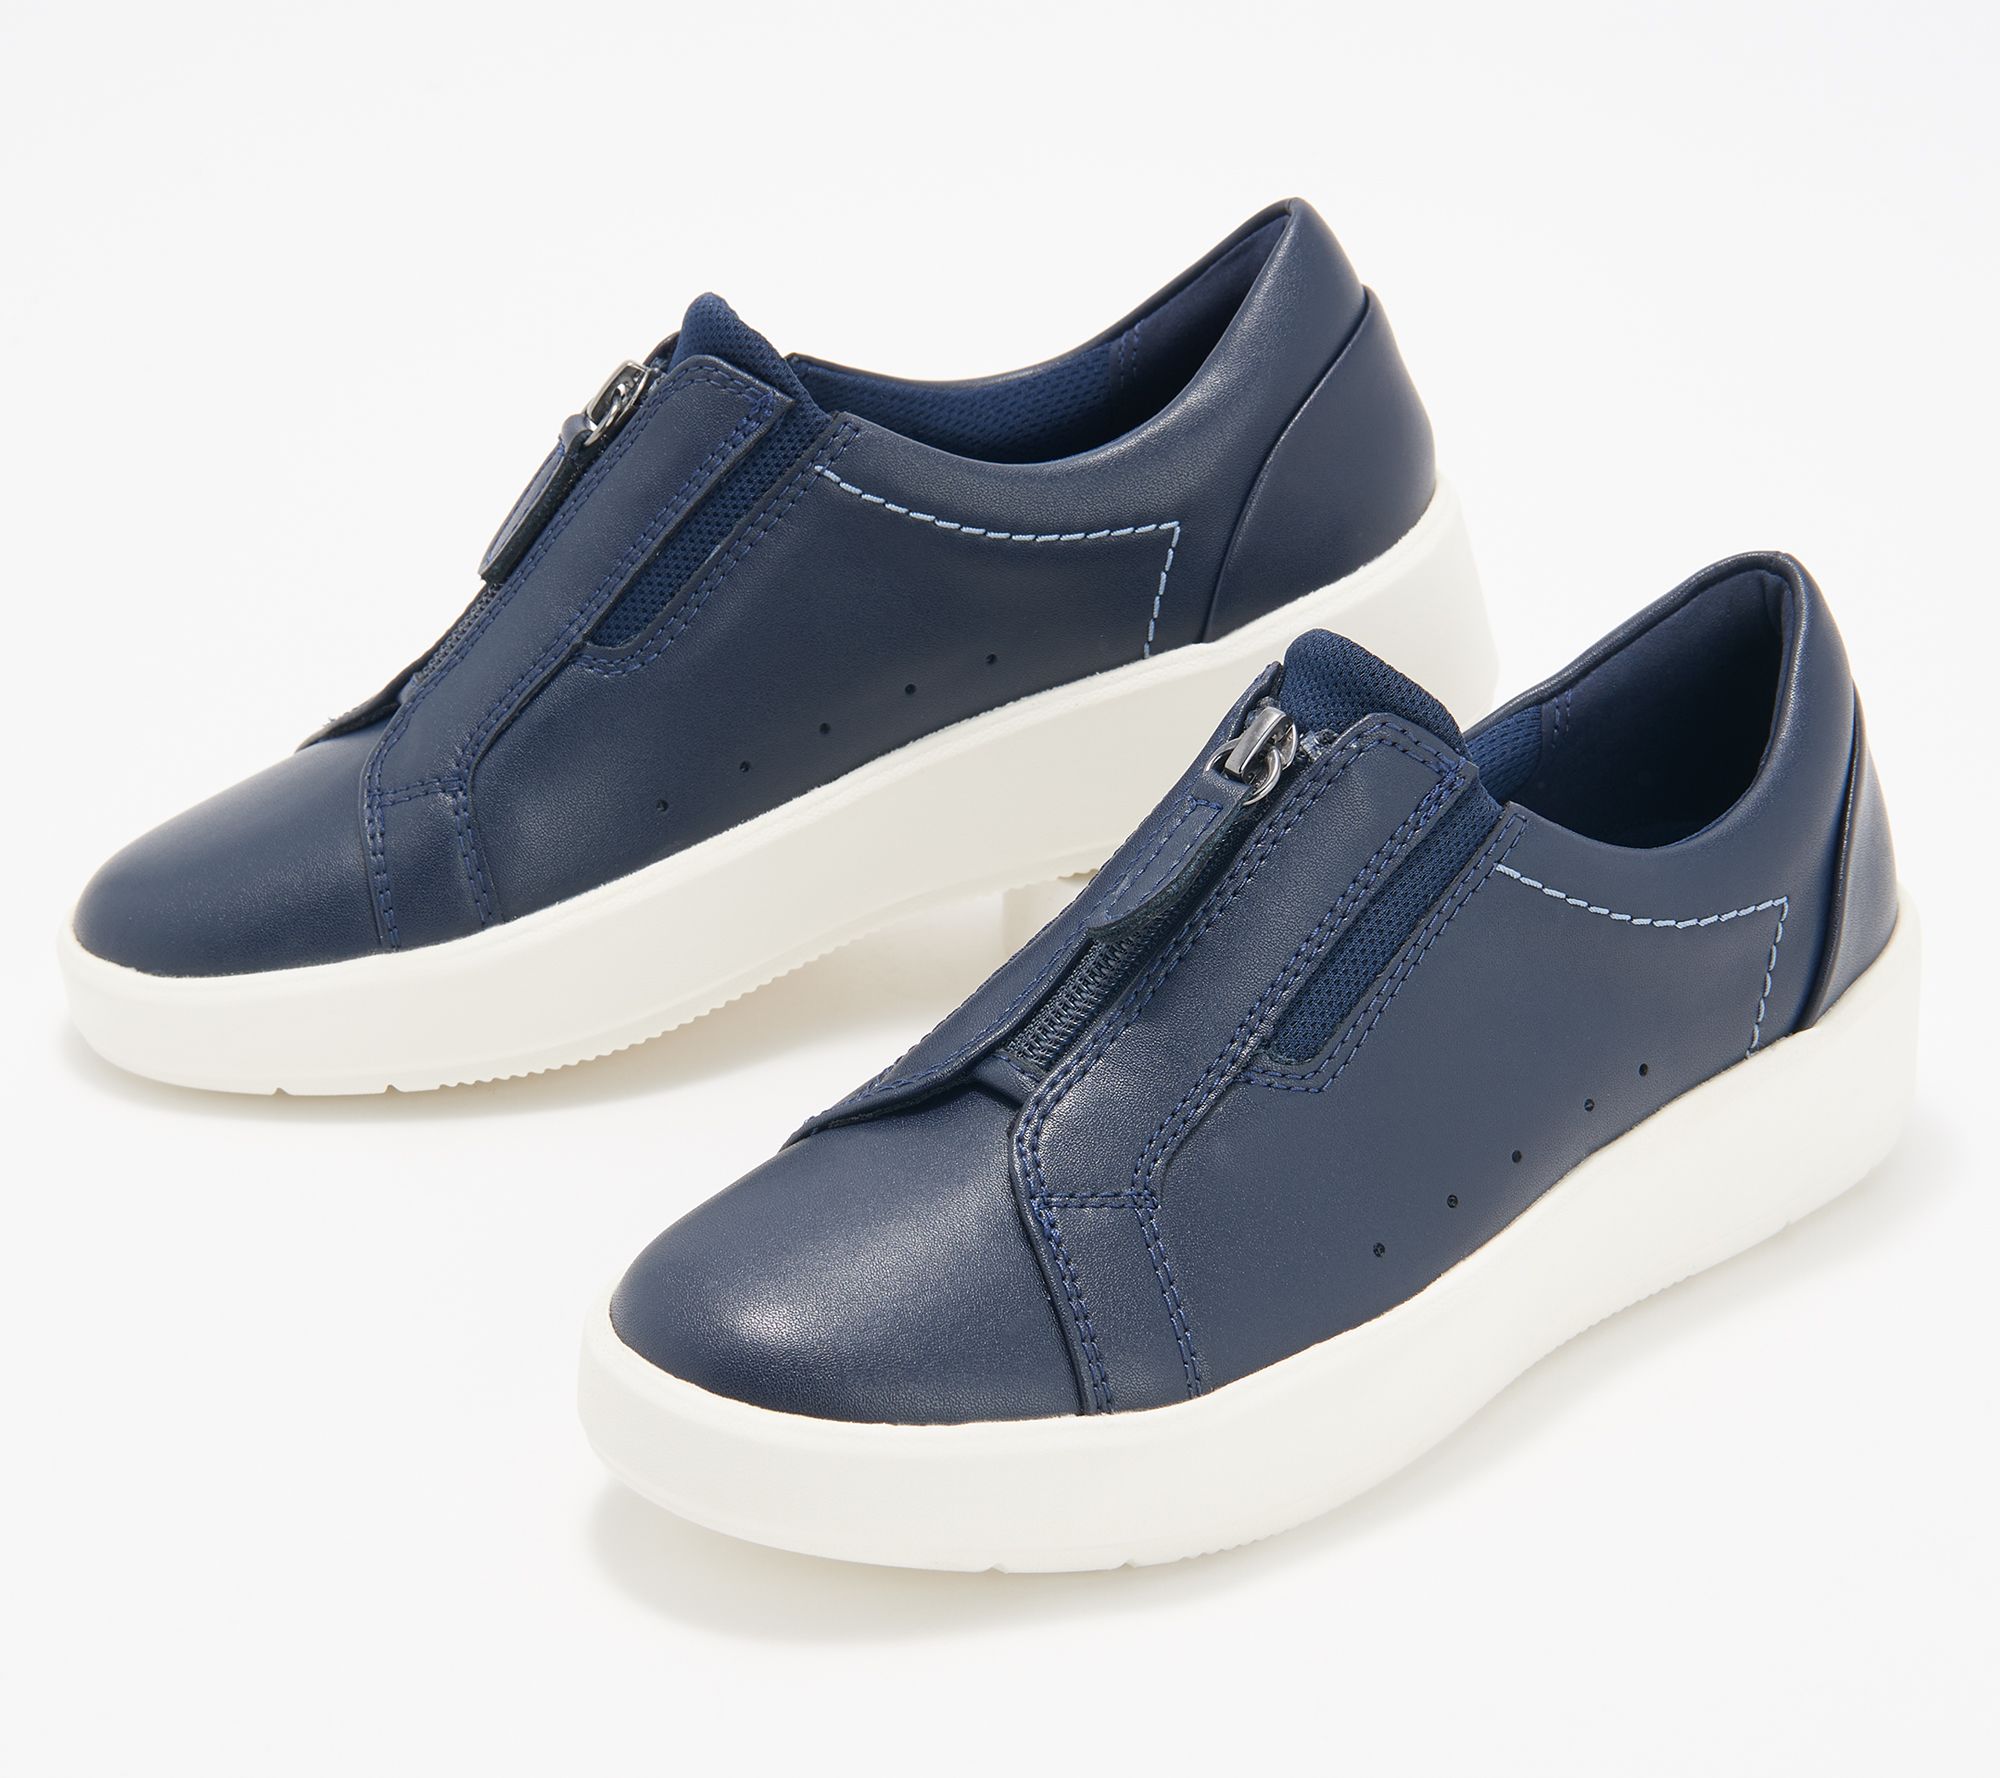 årsag Legitimationsoplysninger Undertrykke Clarks Collection Leather/Suede Zipper Sneakers - Layton Rae - QVC.com